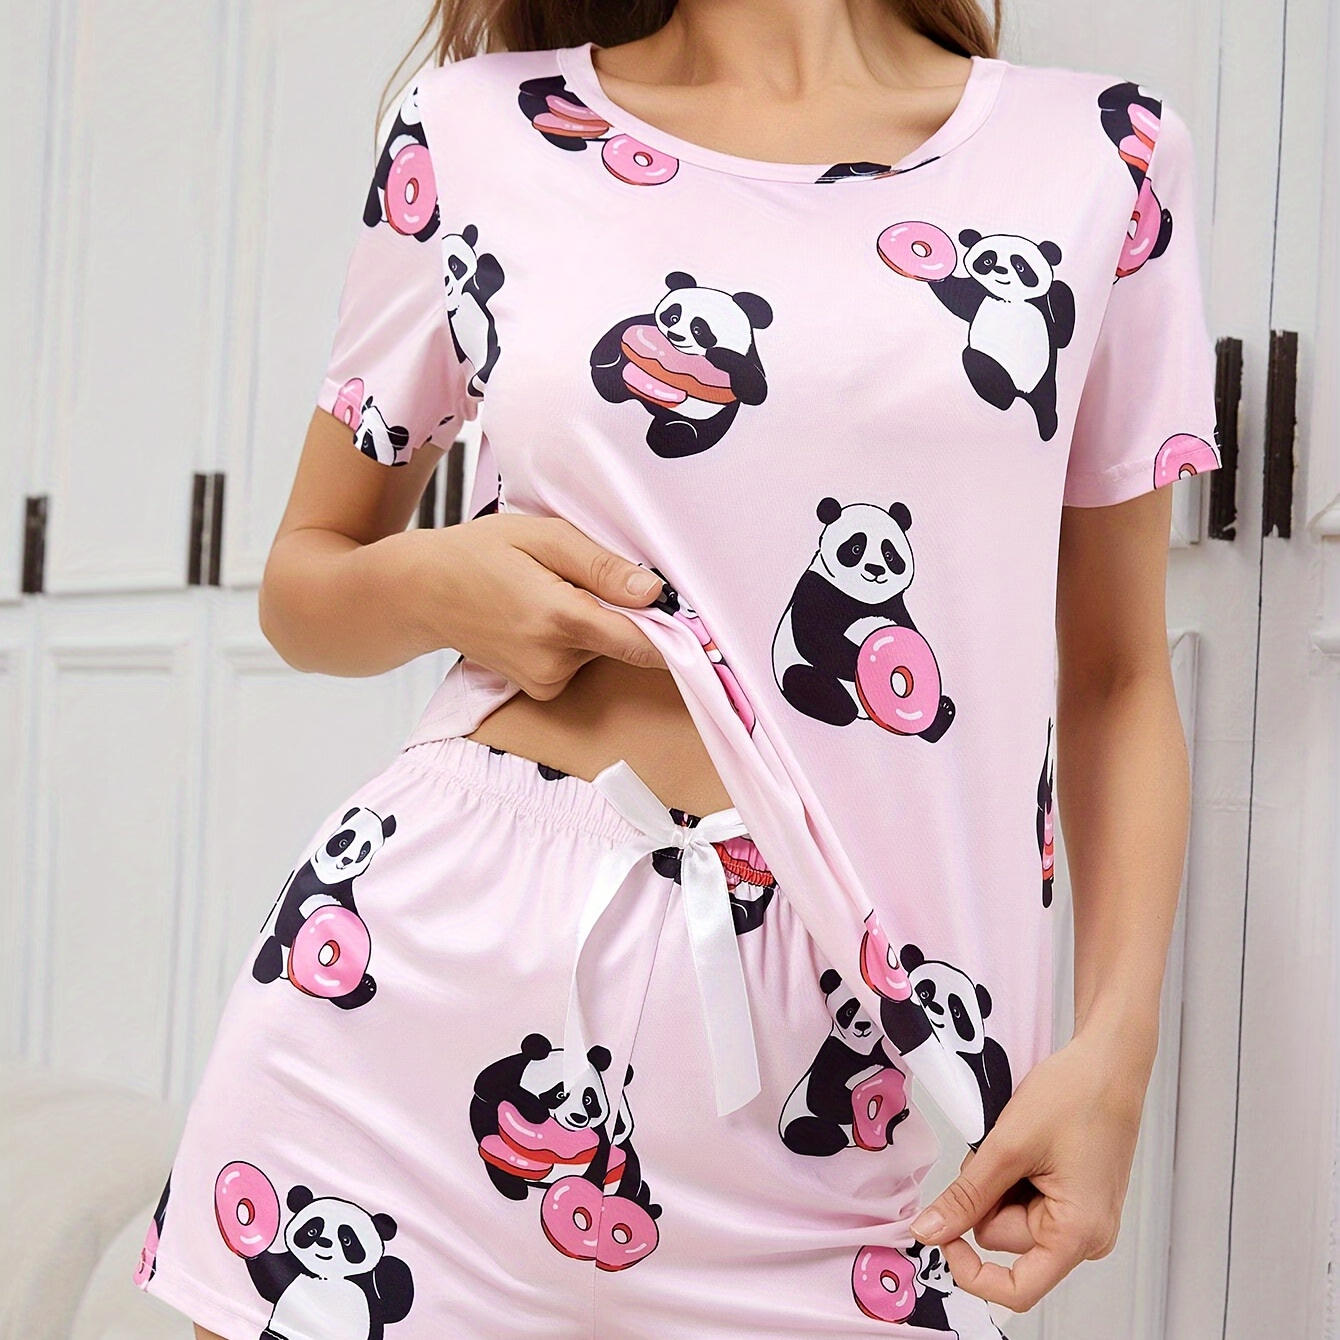 

Women's Cute Panda With Donut Print Pajama Set, Short Sleeve Round Neck Top & Shorts, Comfortable Relaxed Fit